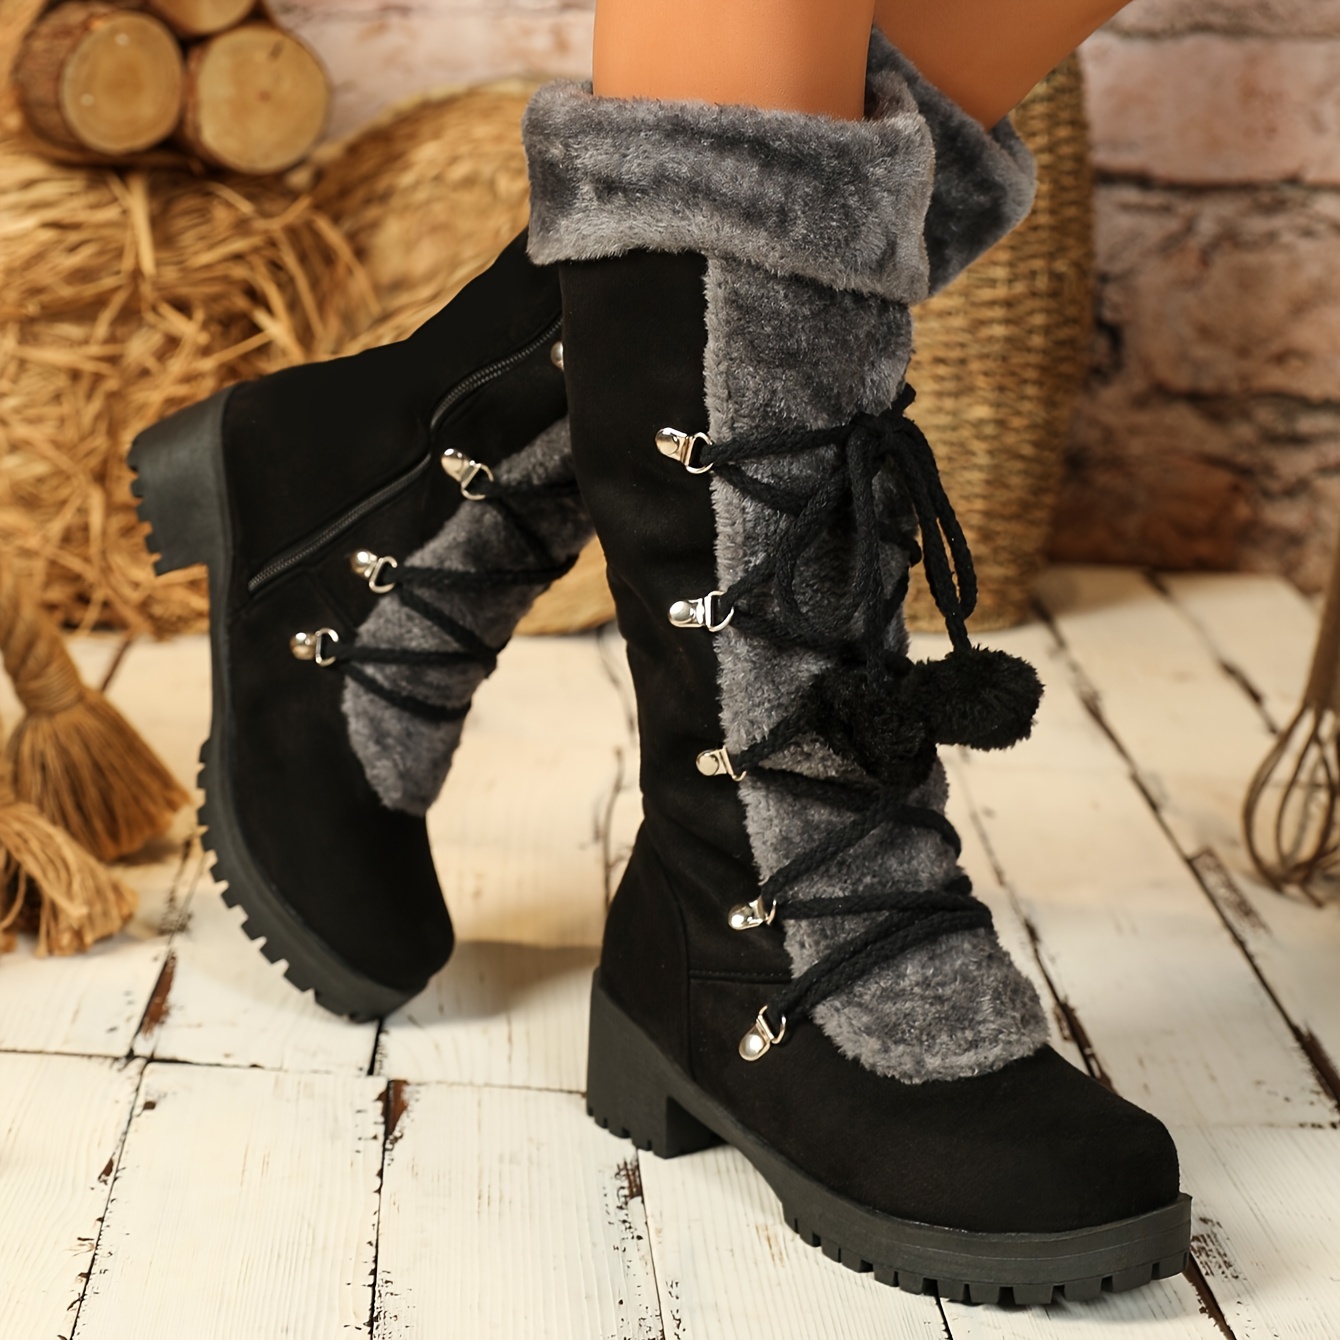 Women Snow Boots Fur Lined Winter Warm Knee High Boot Outdoor Lace-Up Shoes